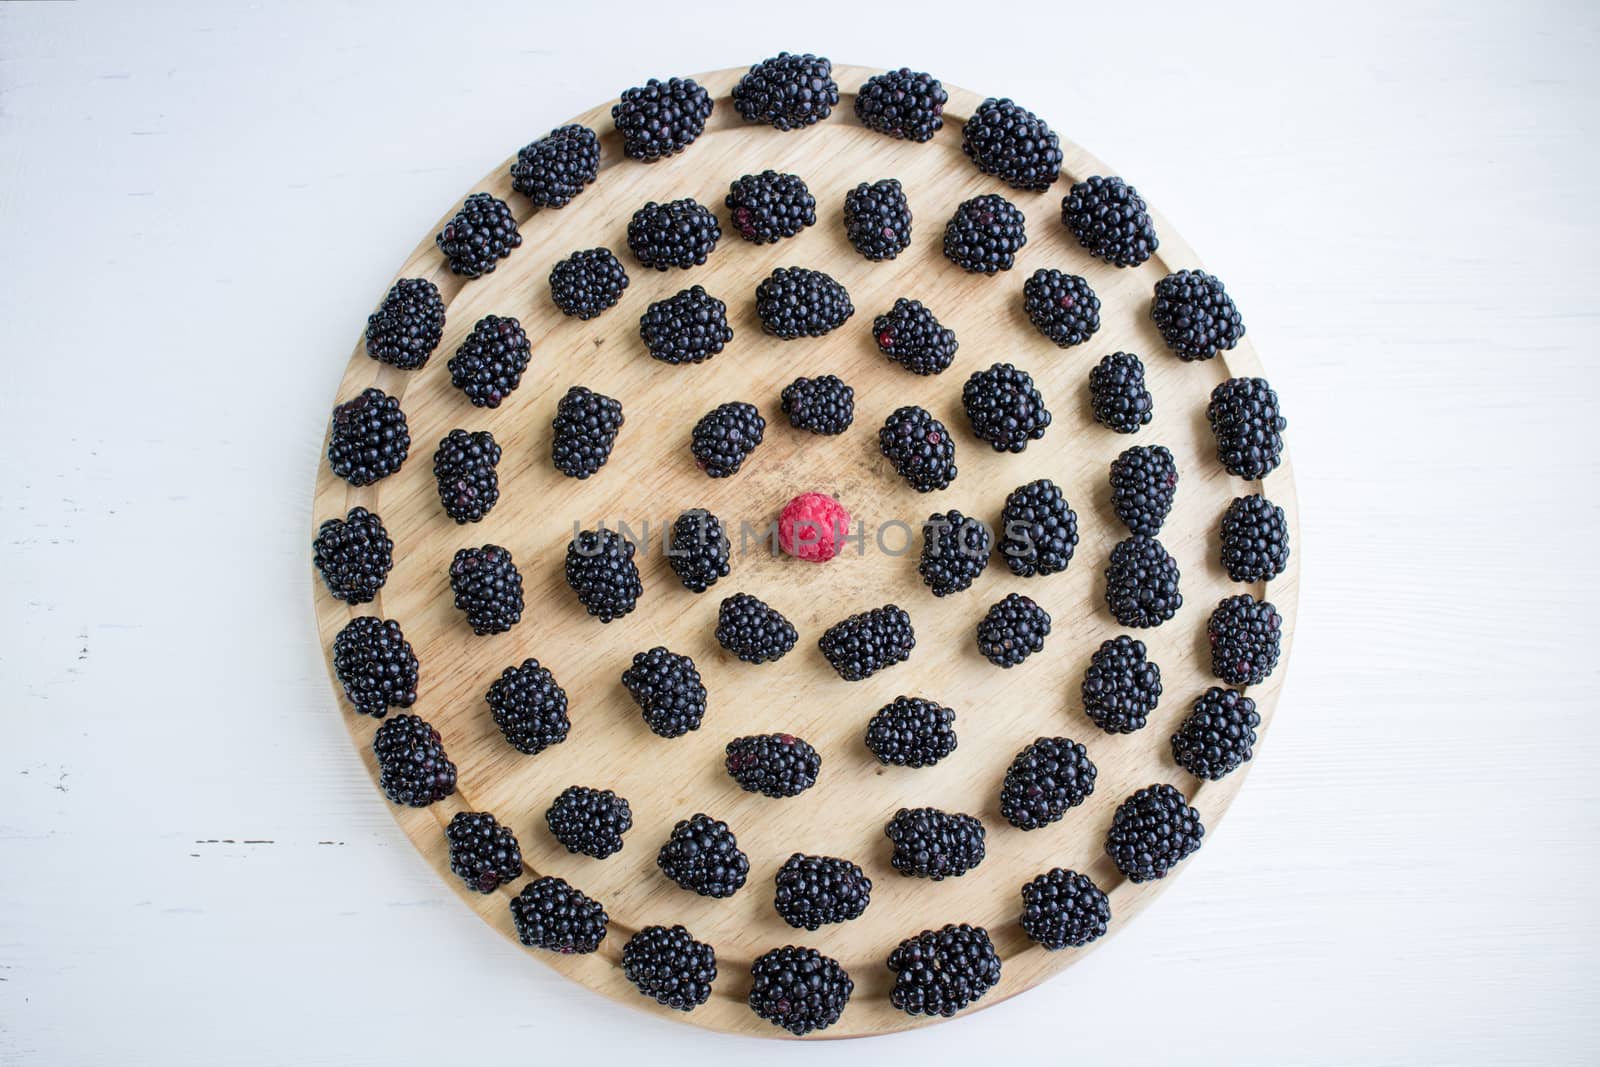 Set of many blackberries and raspberry on round wooden tray by VeraVerano